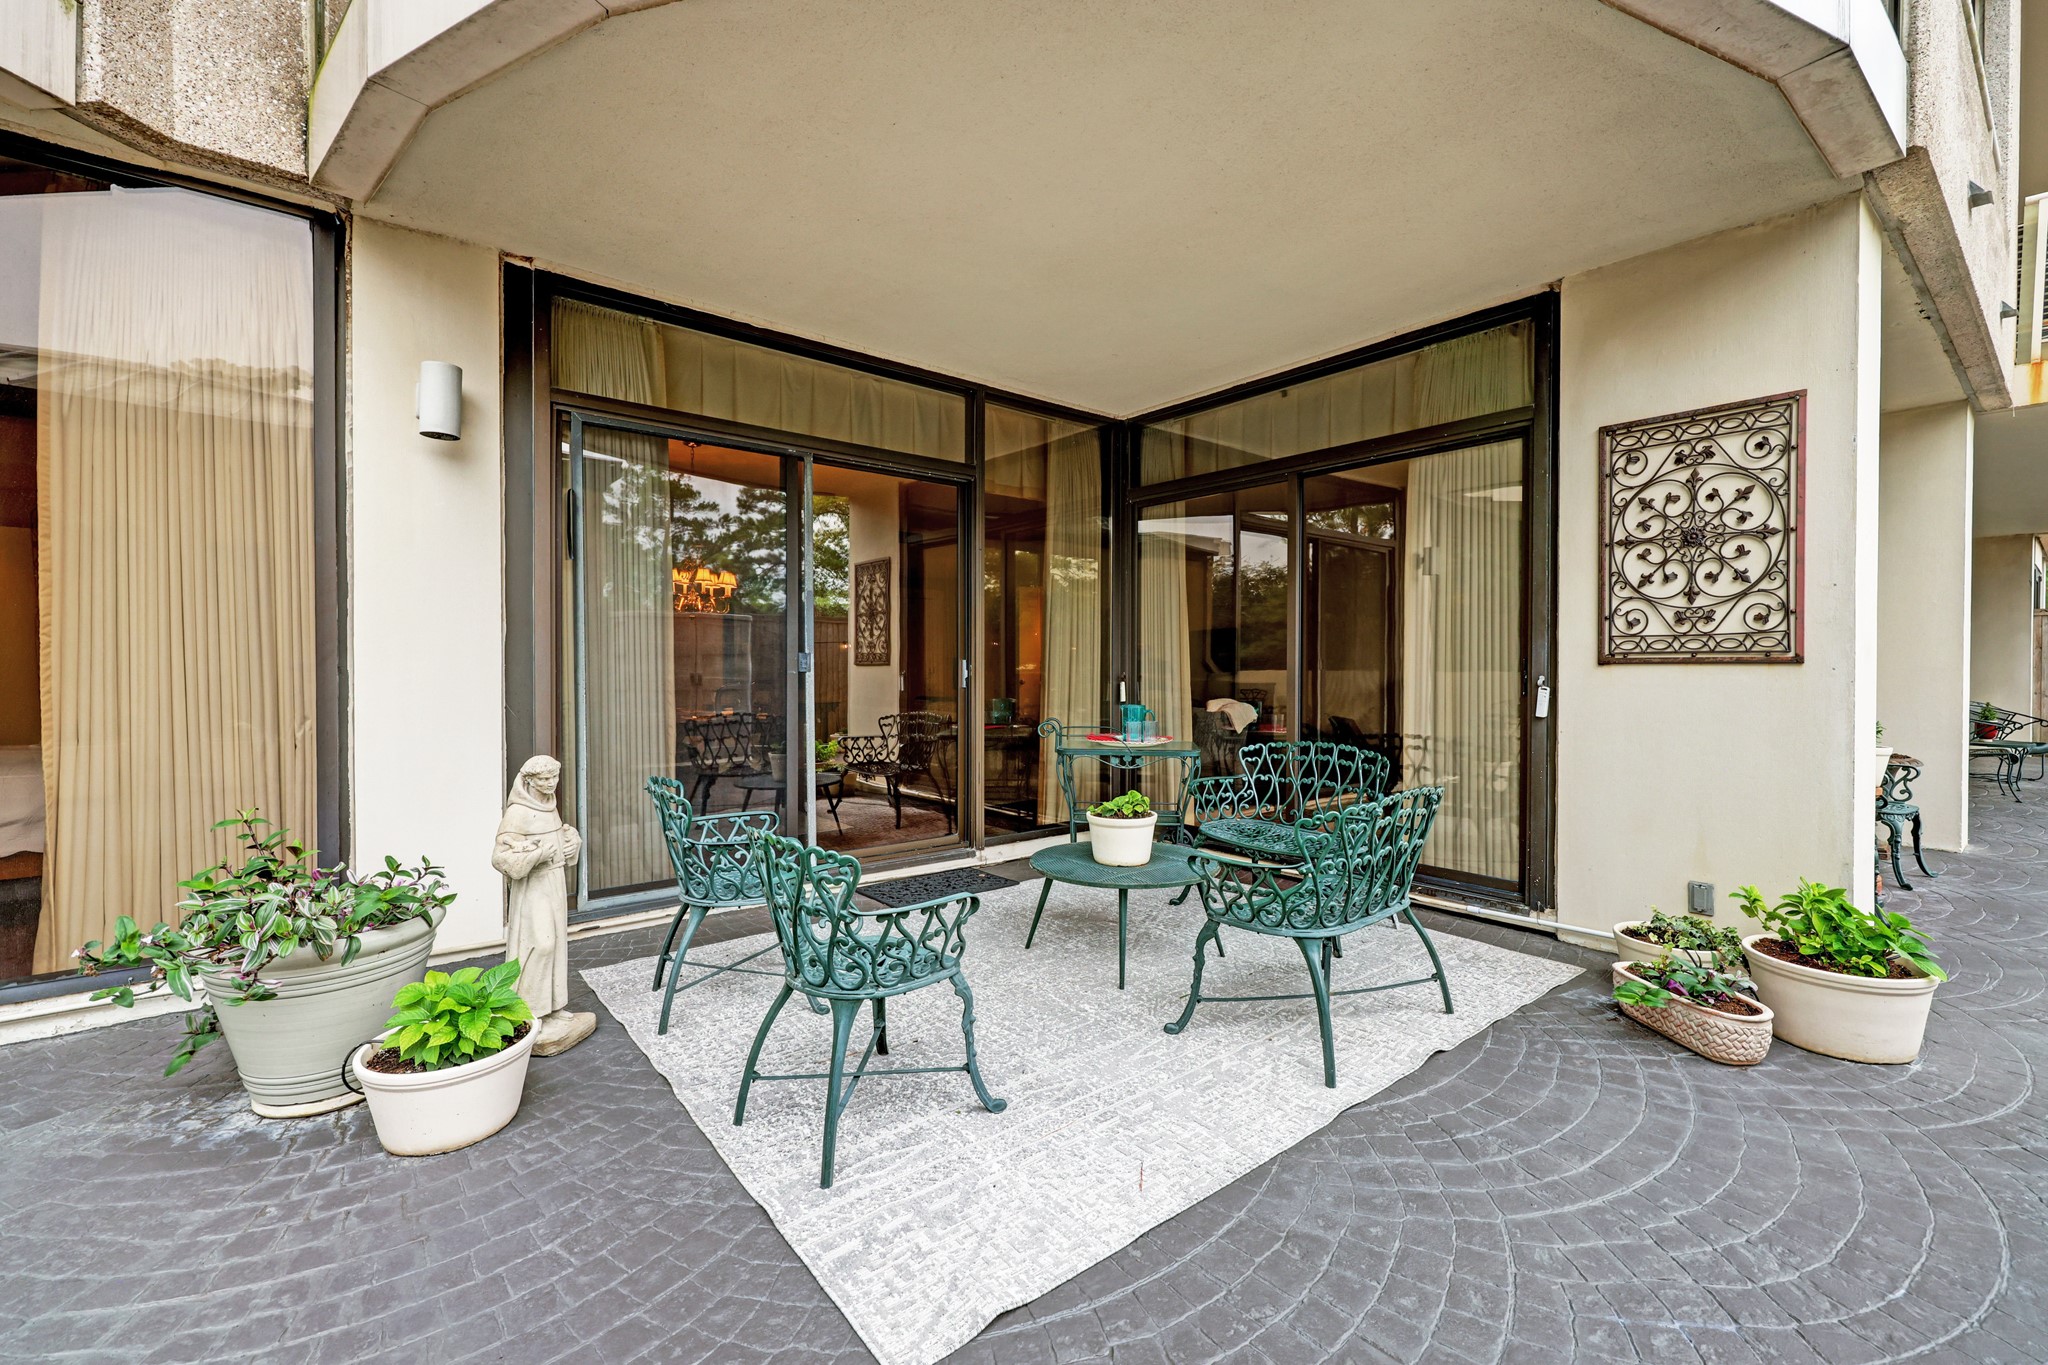 outdoor patio is the perfect place to entertain or have your morning coffee.